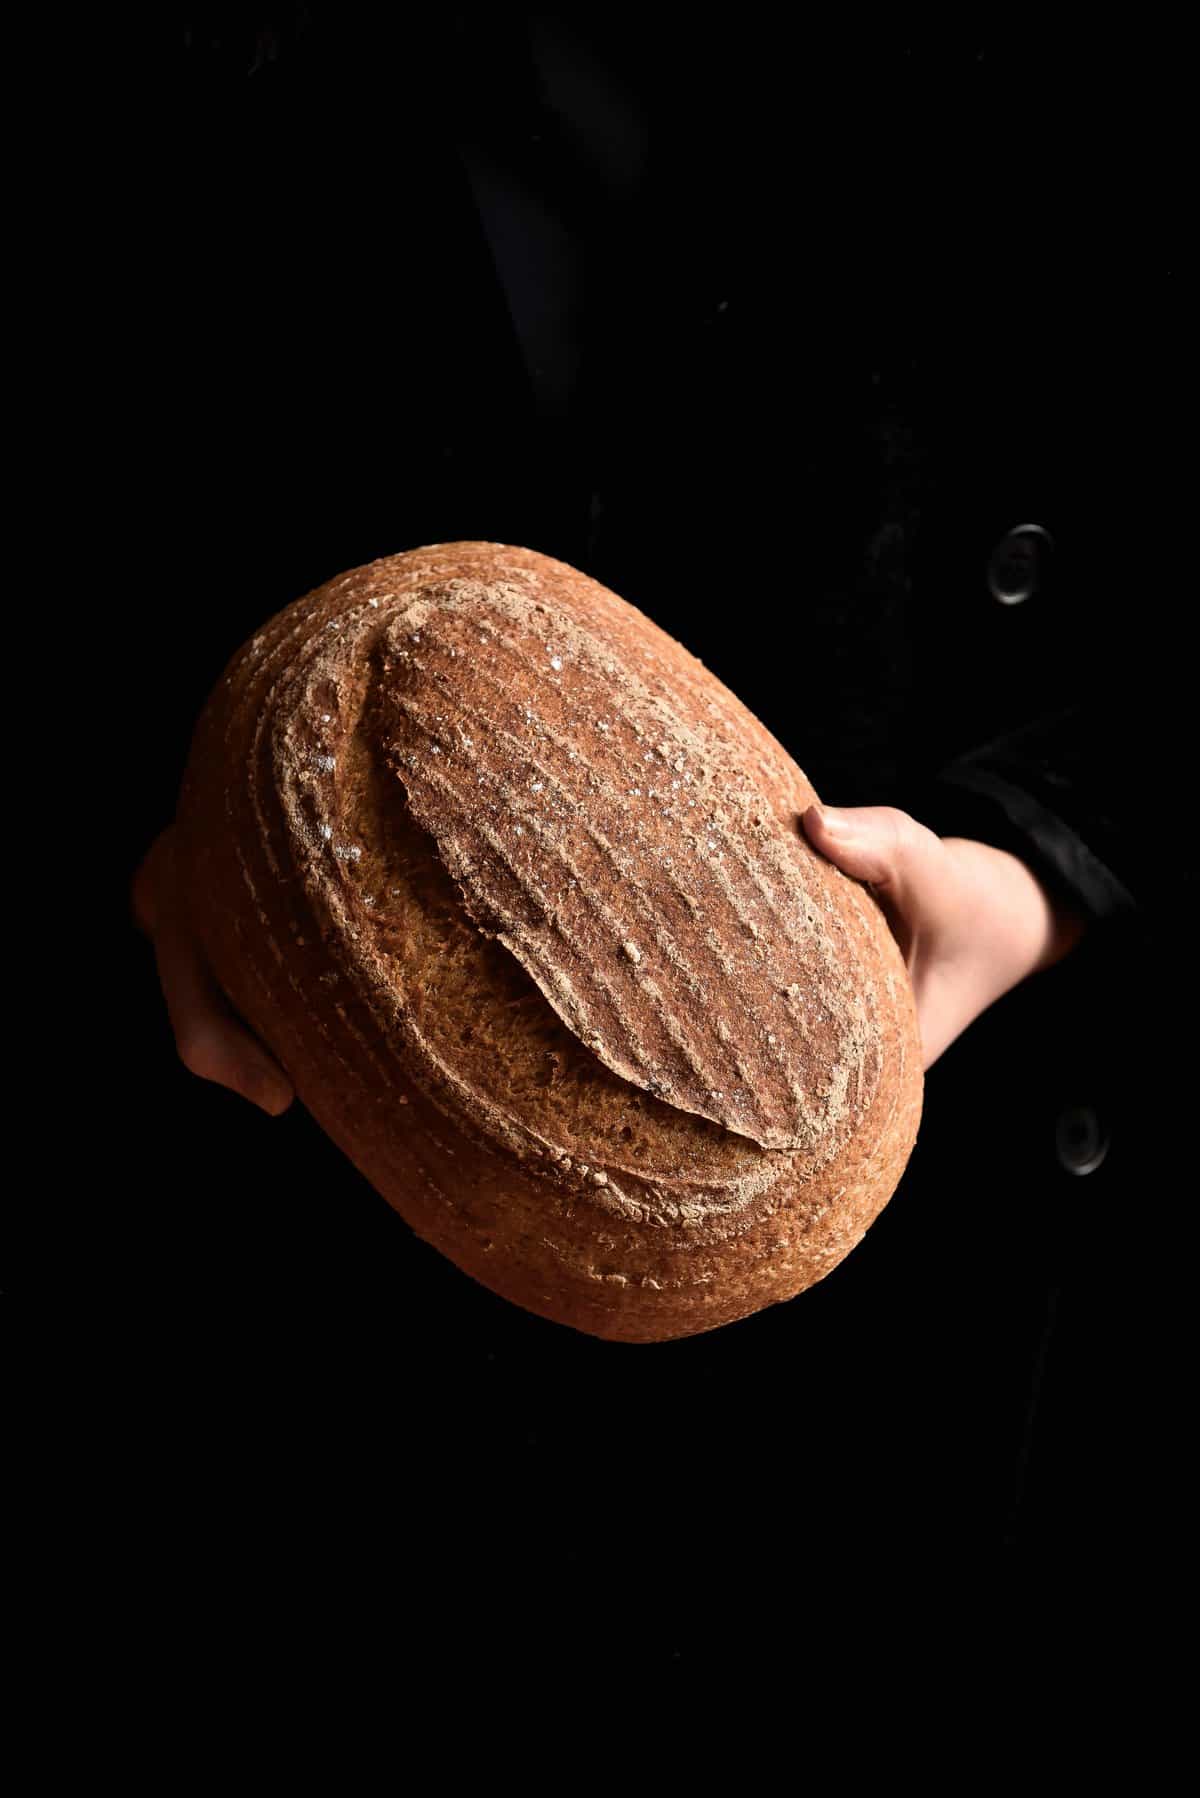 A dark and moody image of a loaf of gluten free sourdough bread being held by someone wearing a black jacket.